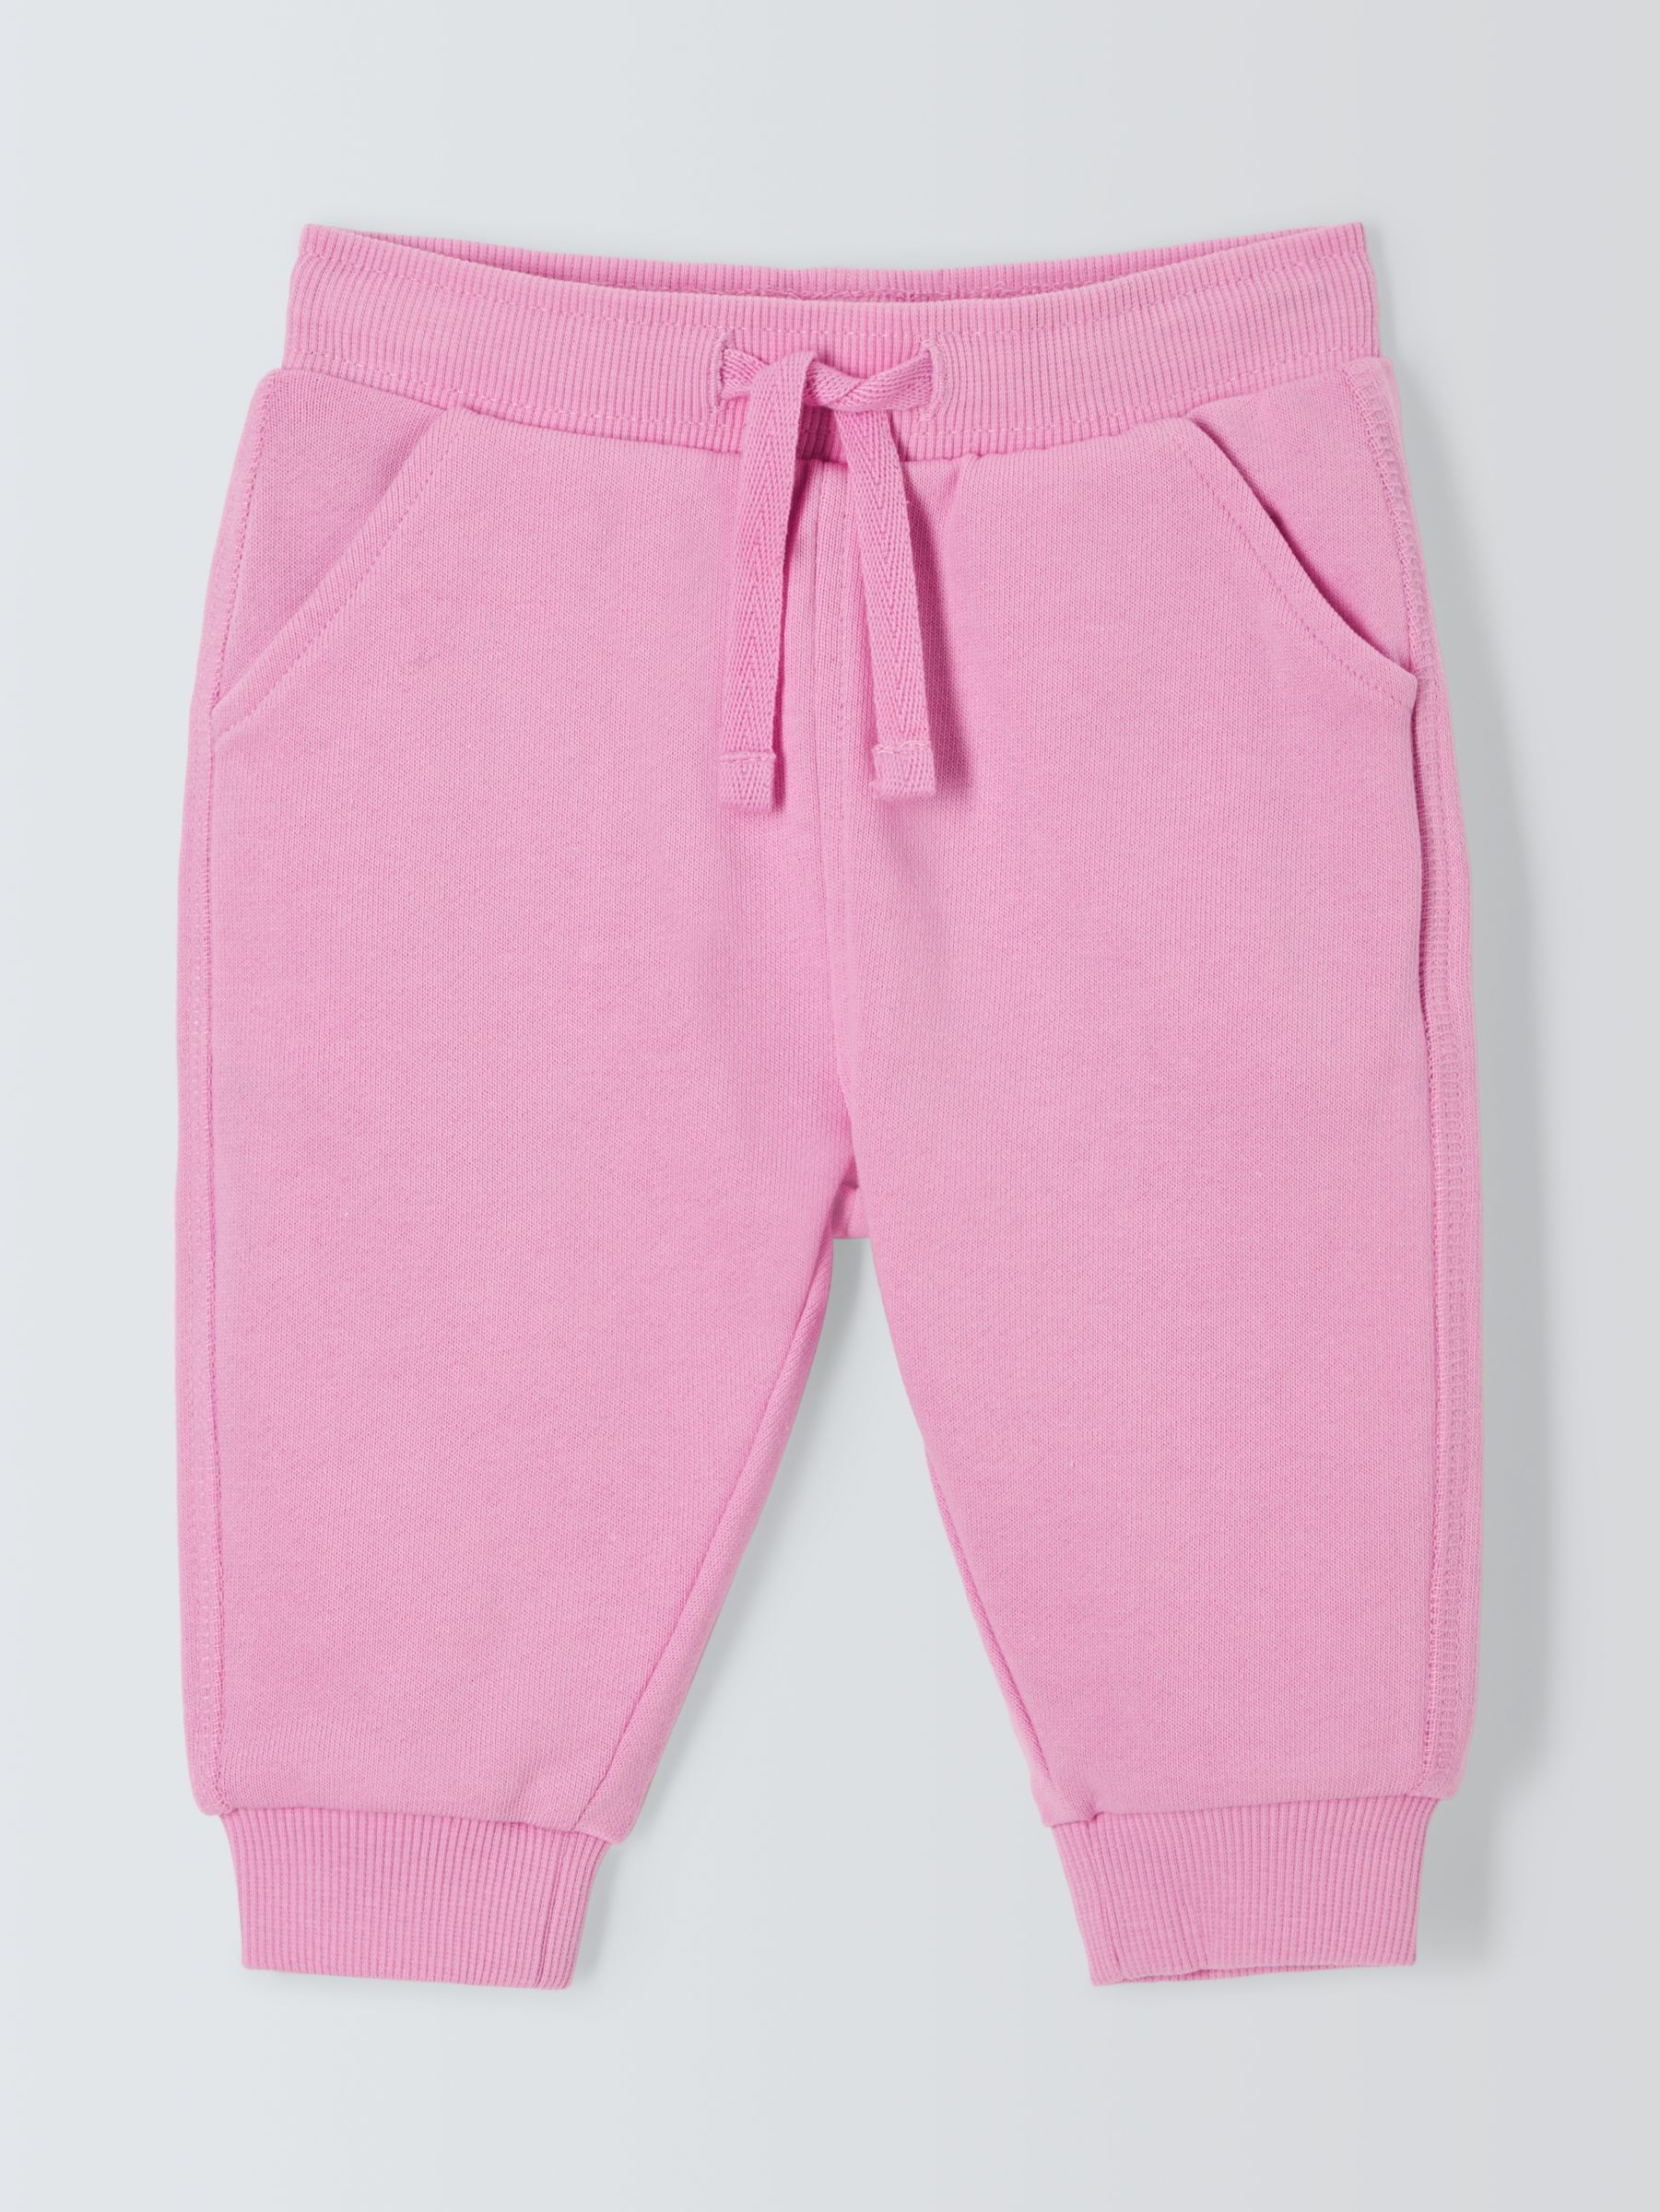 John Lewis ANYDAY Baby Cotton Joggers, Pink, 3-6 months